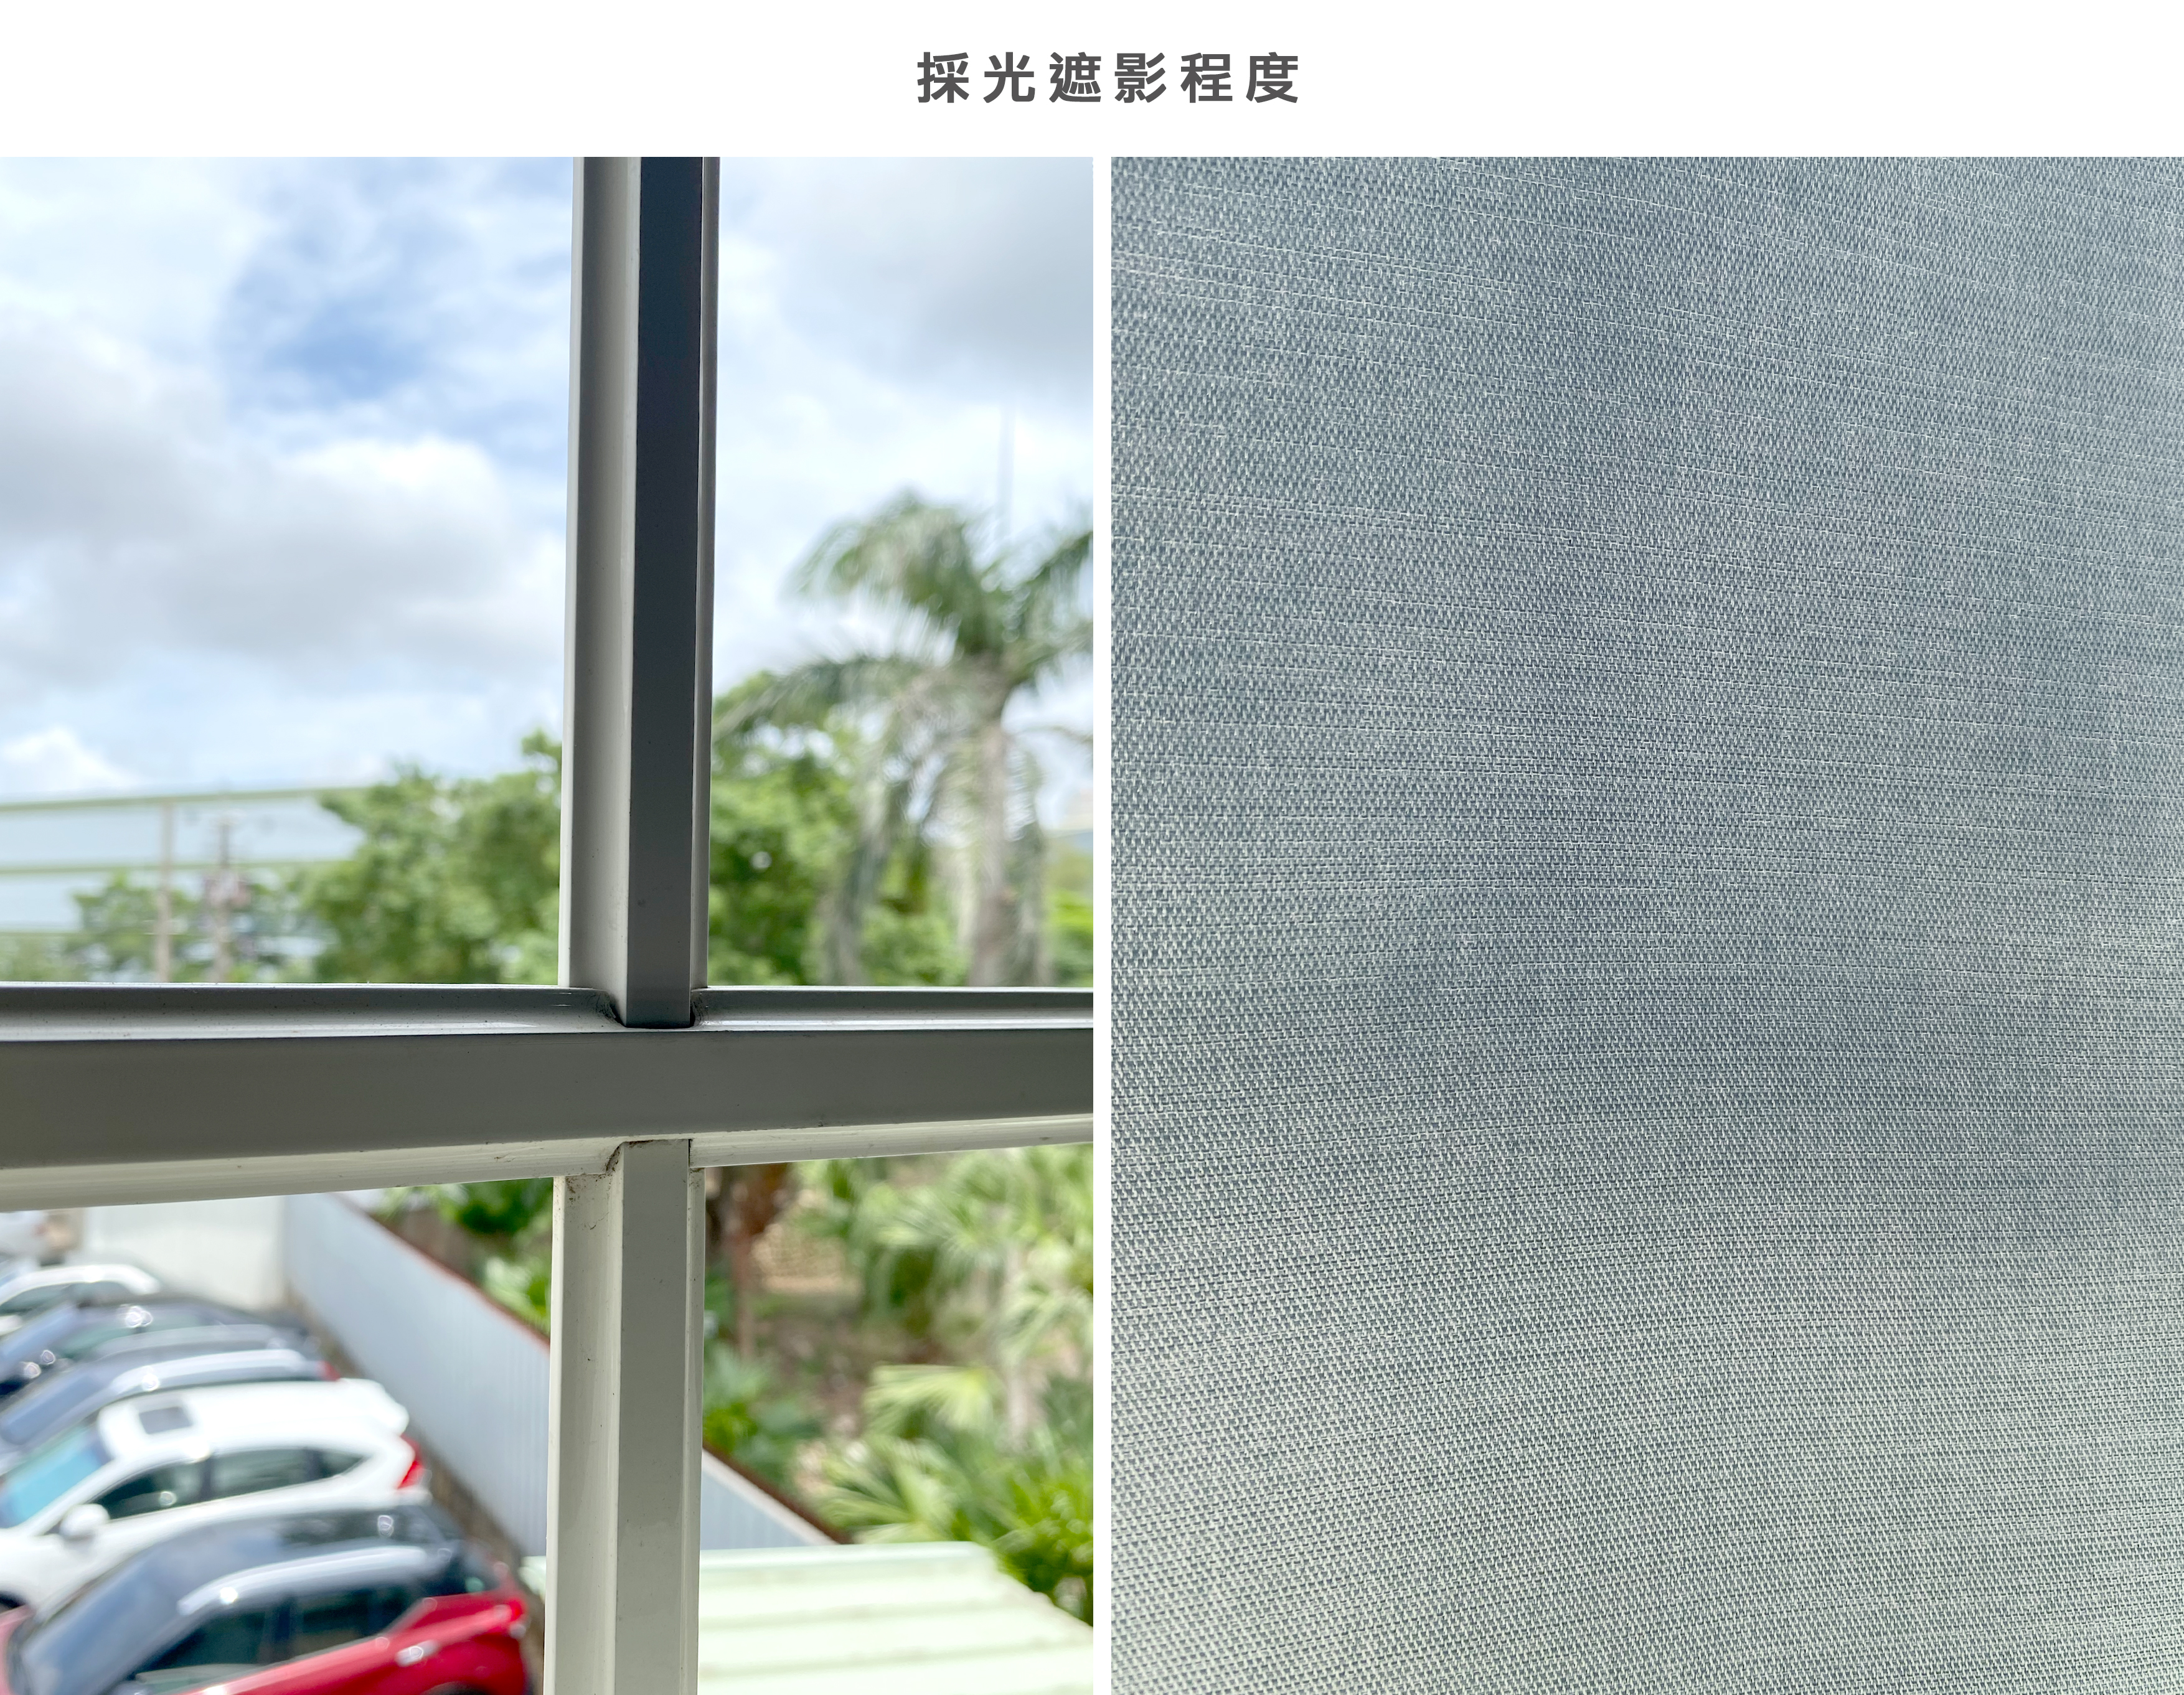 Lo-Fi House Select Curtains　Blackout Blackout Brushed - Ash Green Heat Insulation Blinds & Shades Child Safety／Cordless Blinds & Shades Blackout Blinds & Shades Motorized Blinds／Smart Blinds & Shades